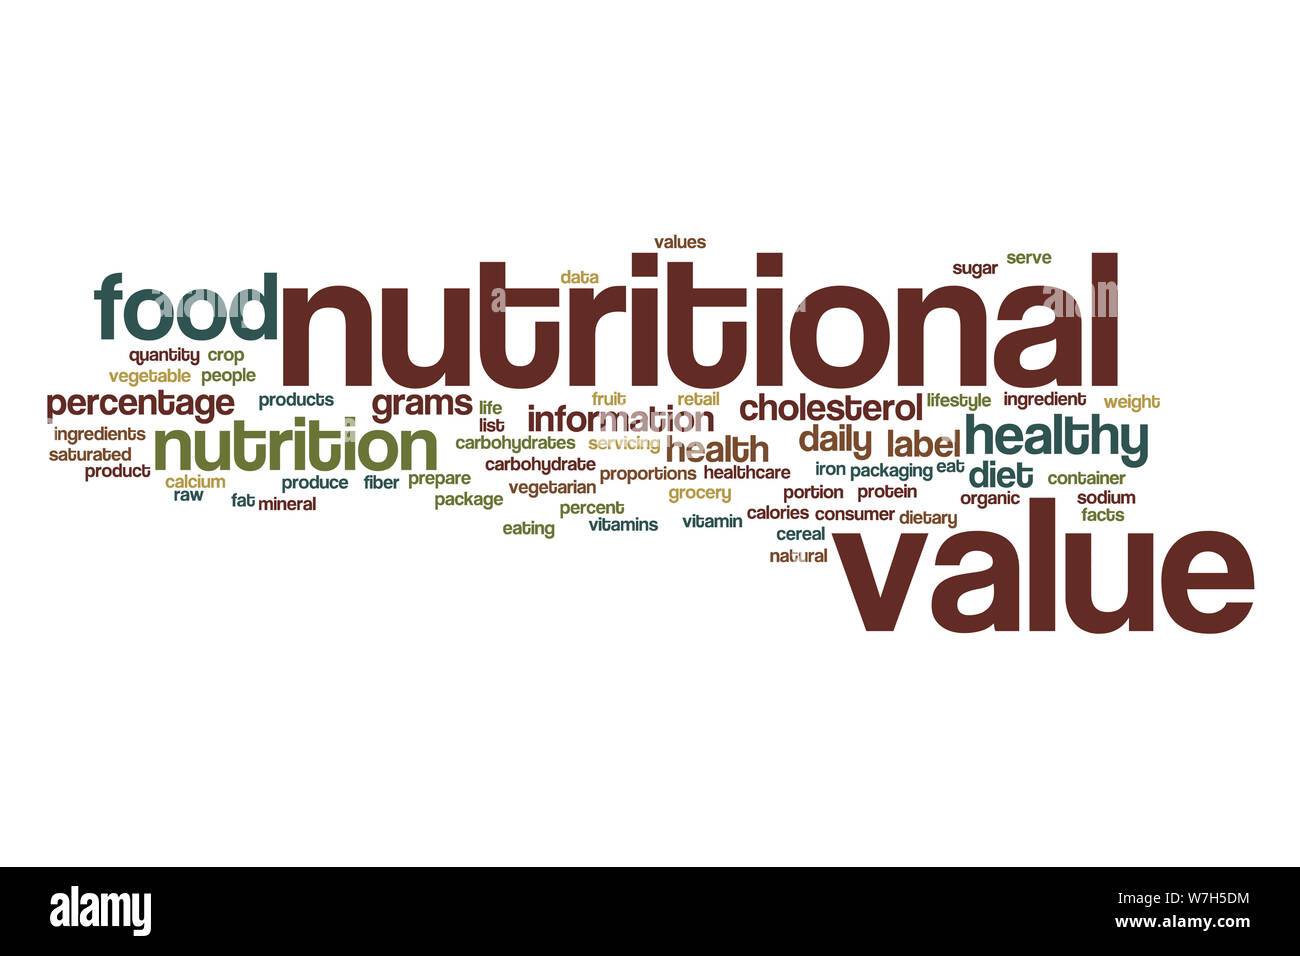 Nutritional value word cloud concept Stock Photo